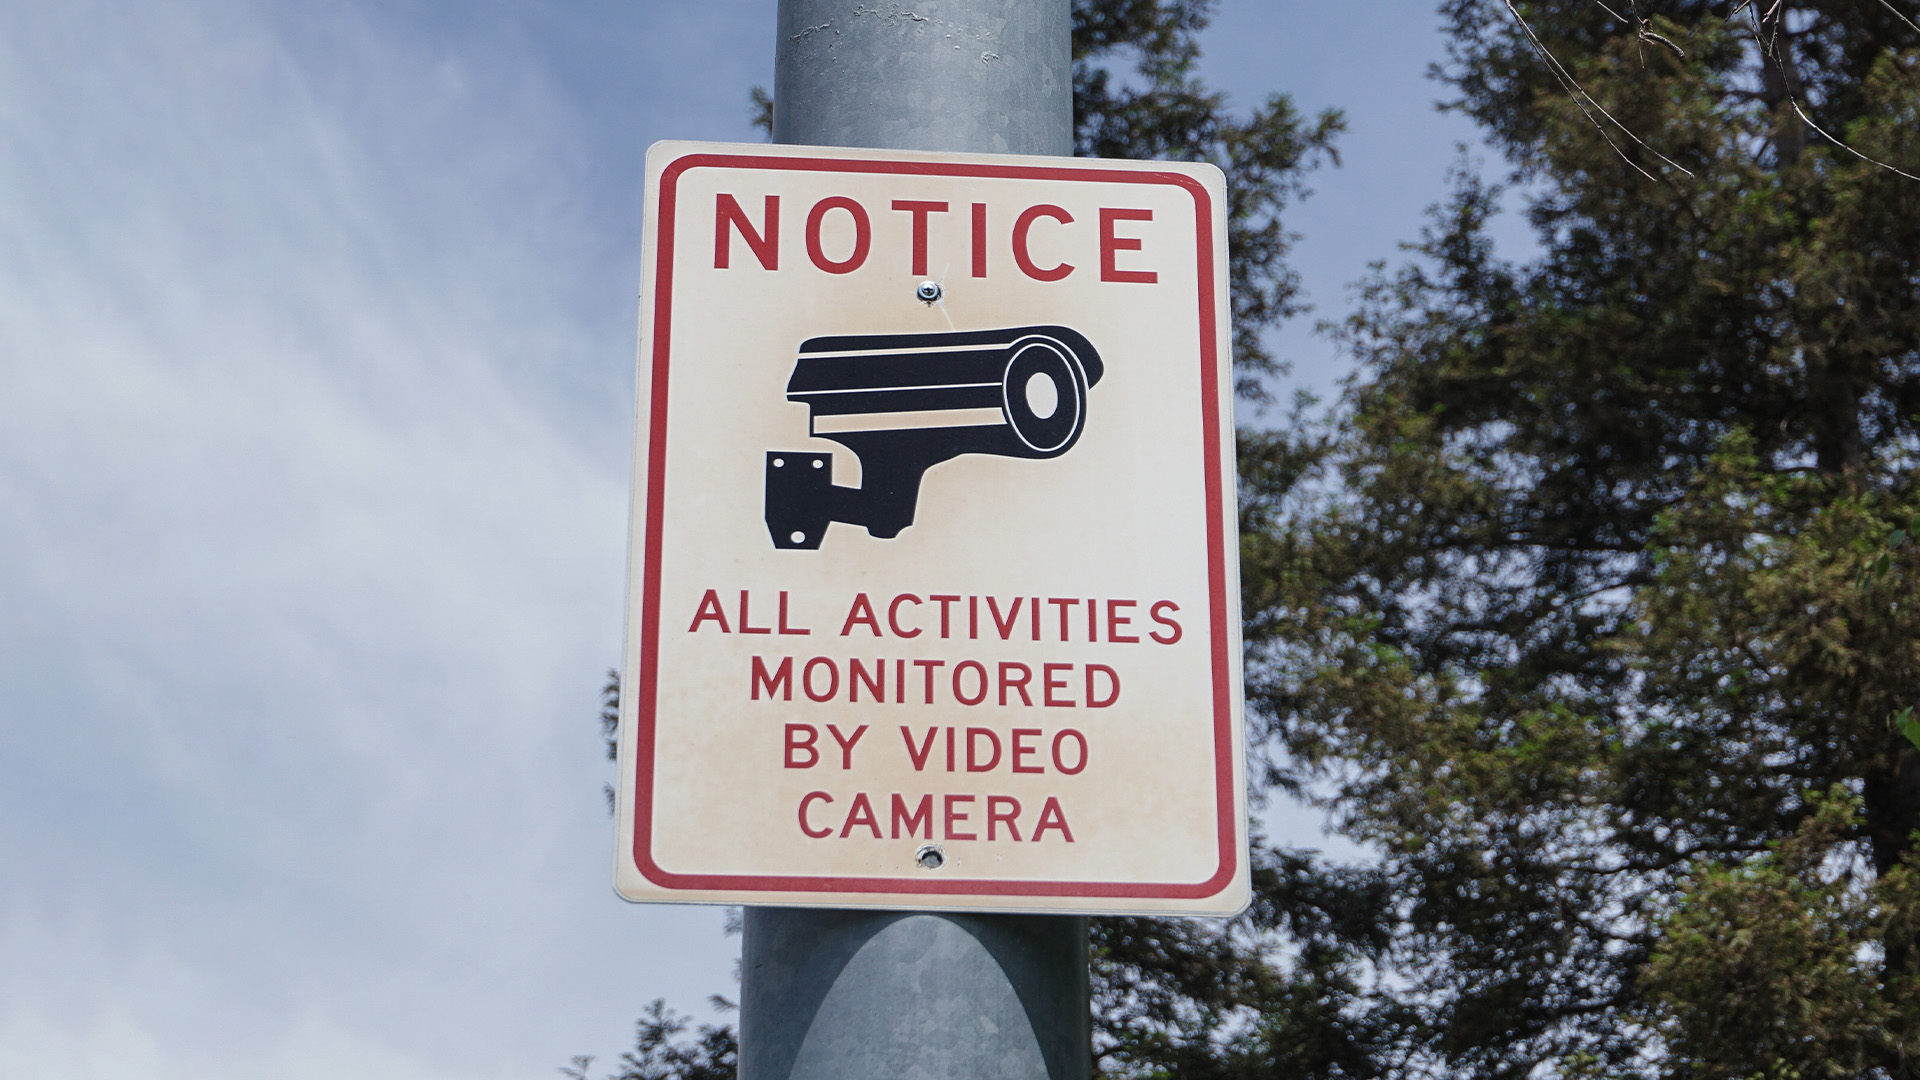 HOA installs cameras to keep eye on neighborhood – video helps draw up ‘hot list’ of targets but sparks privacy concern